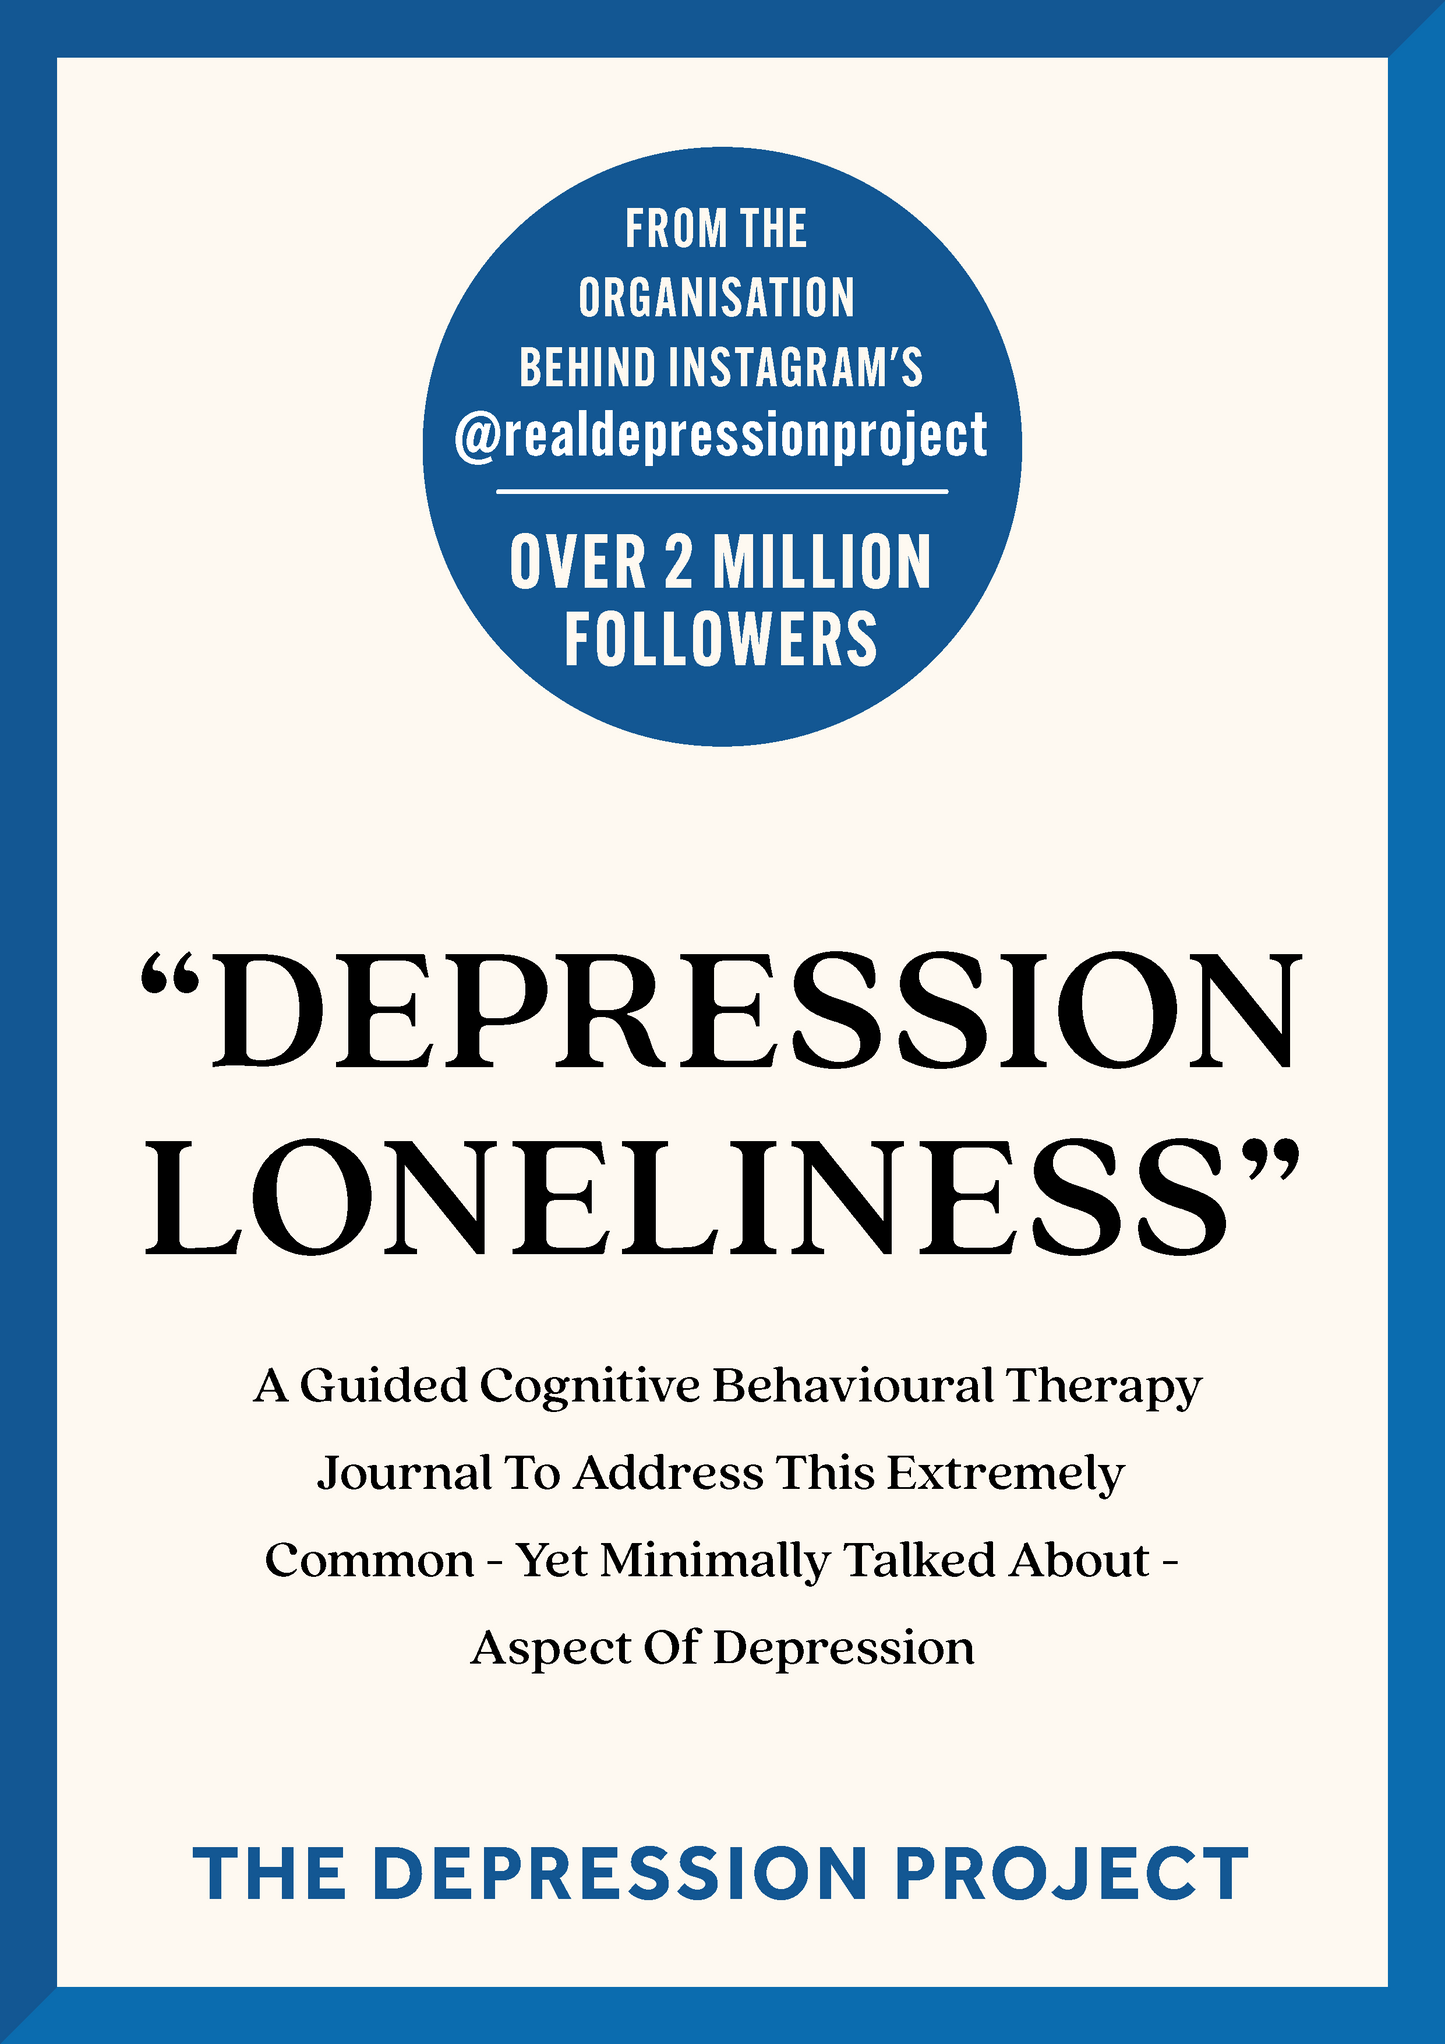 The "Depression Loneliness" Journal